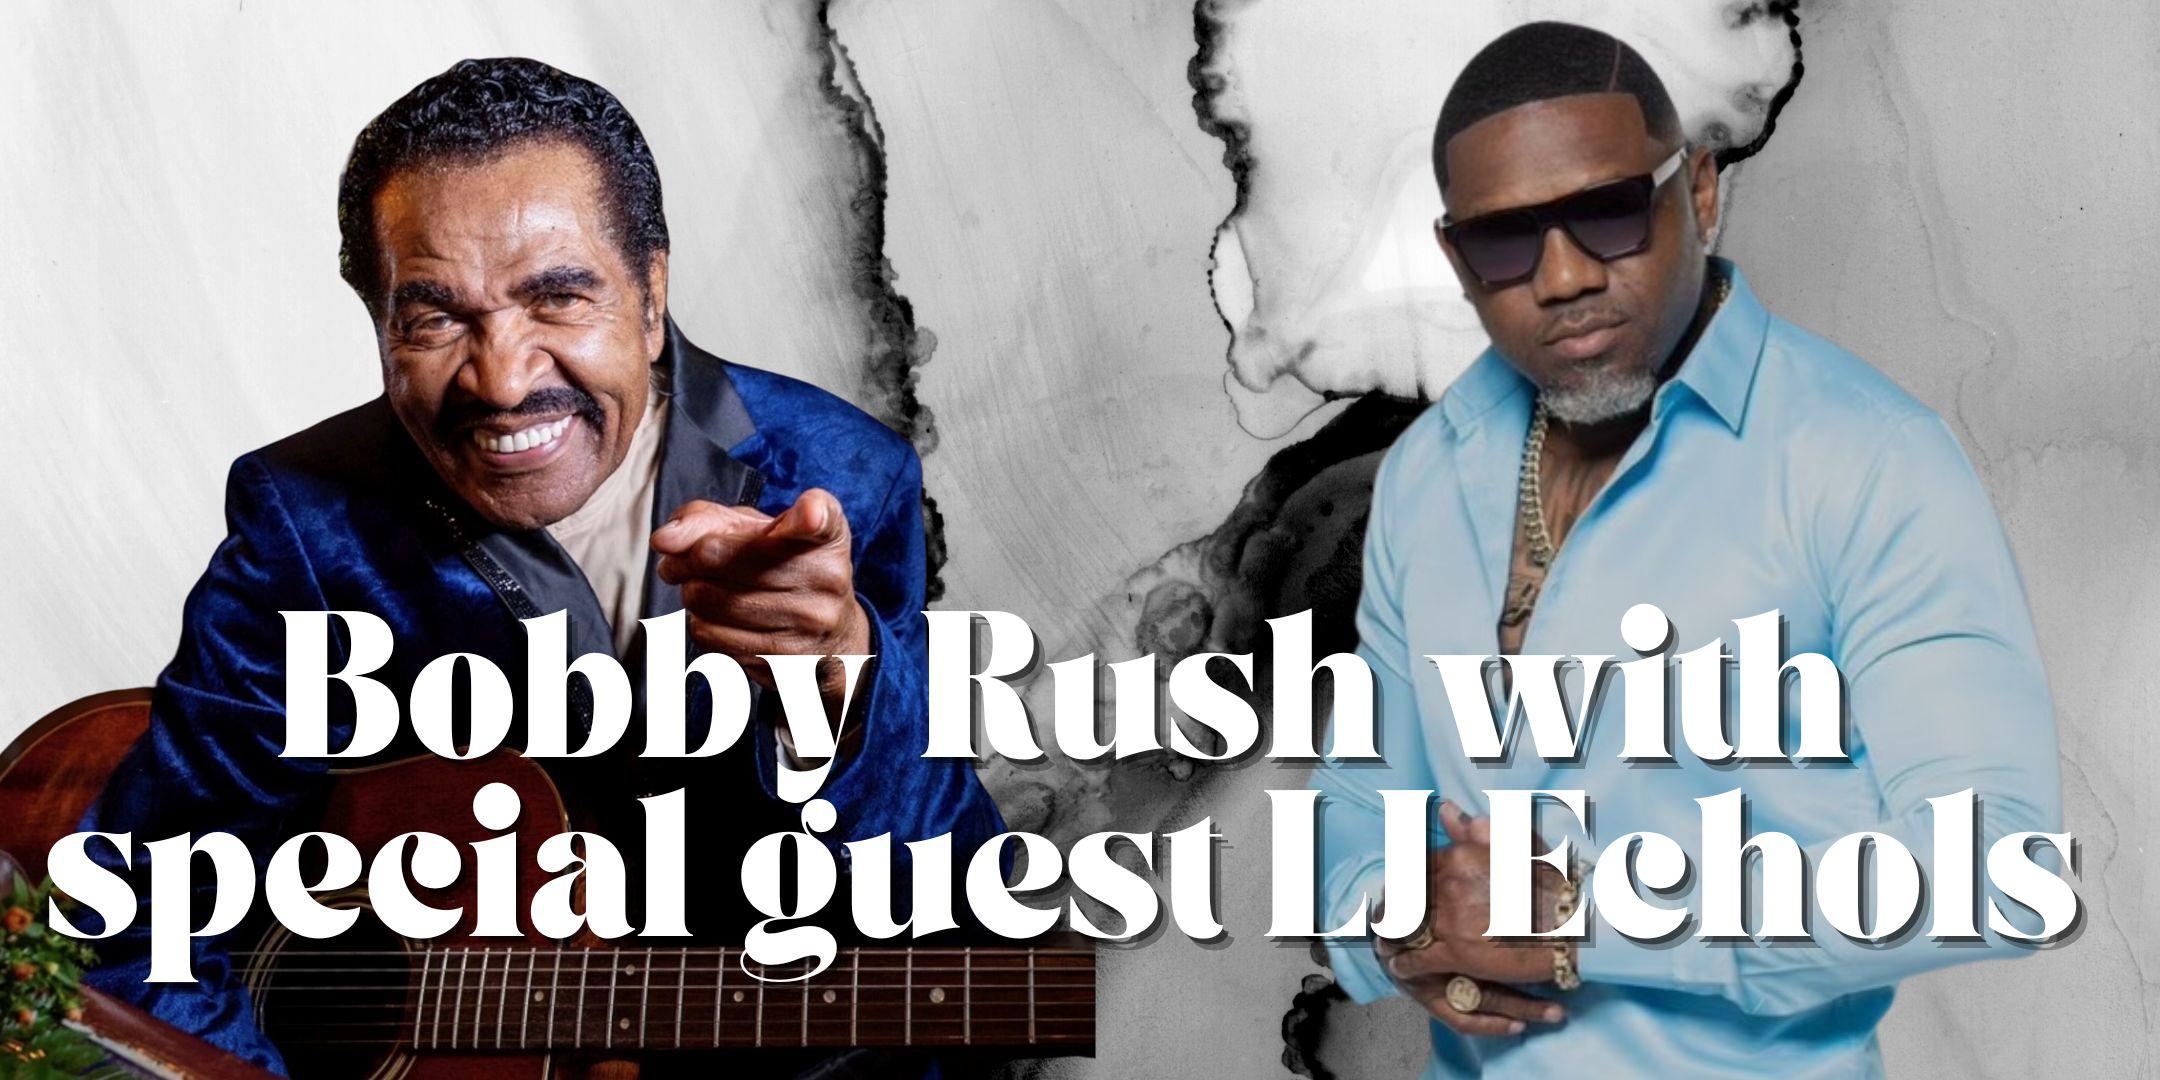 Bobby Rush with special guest LJ Echols